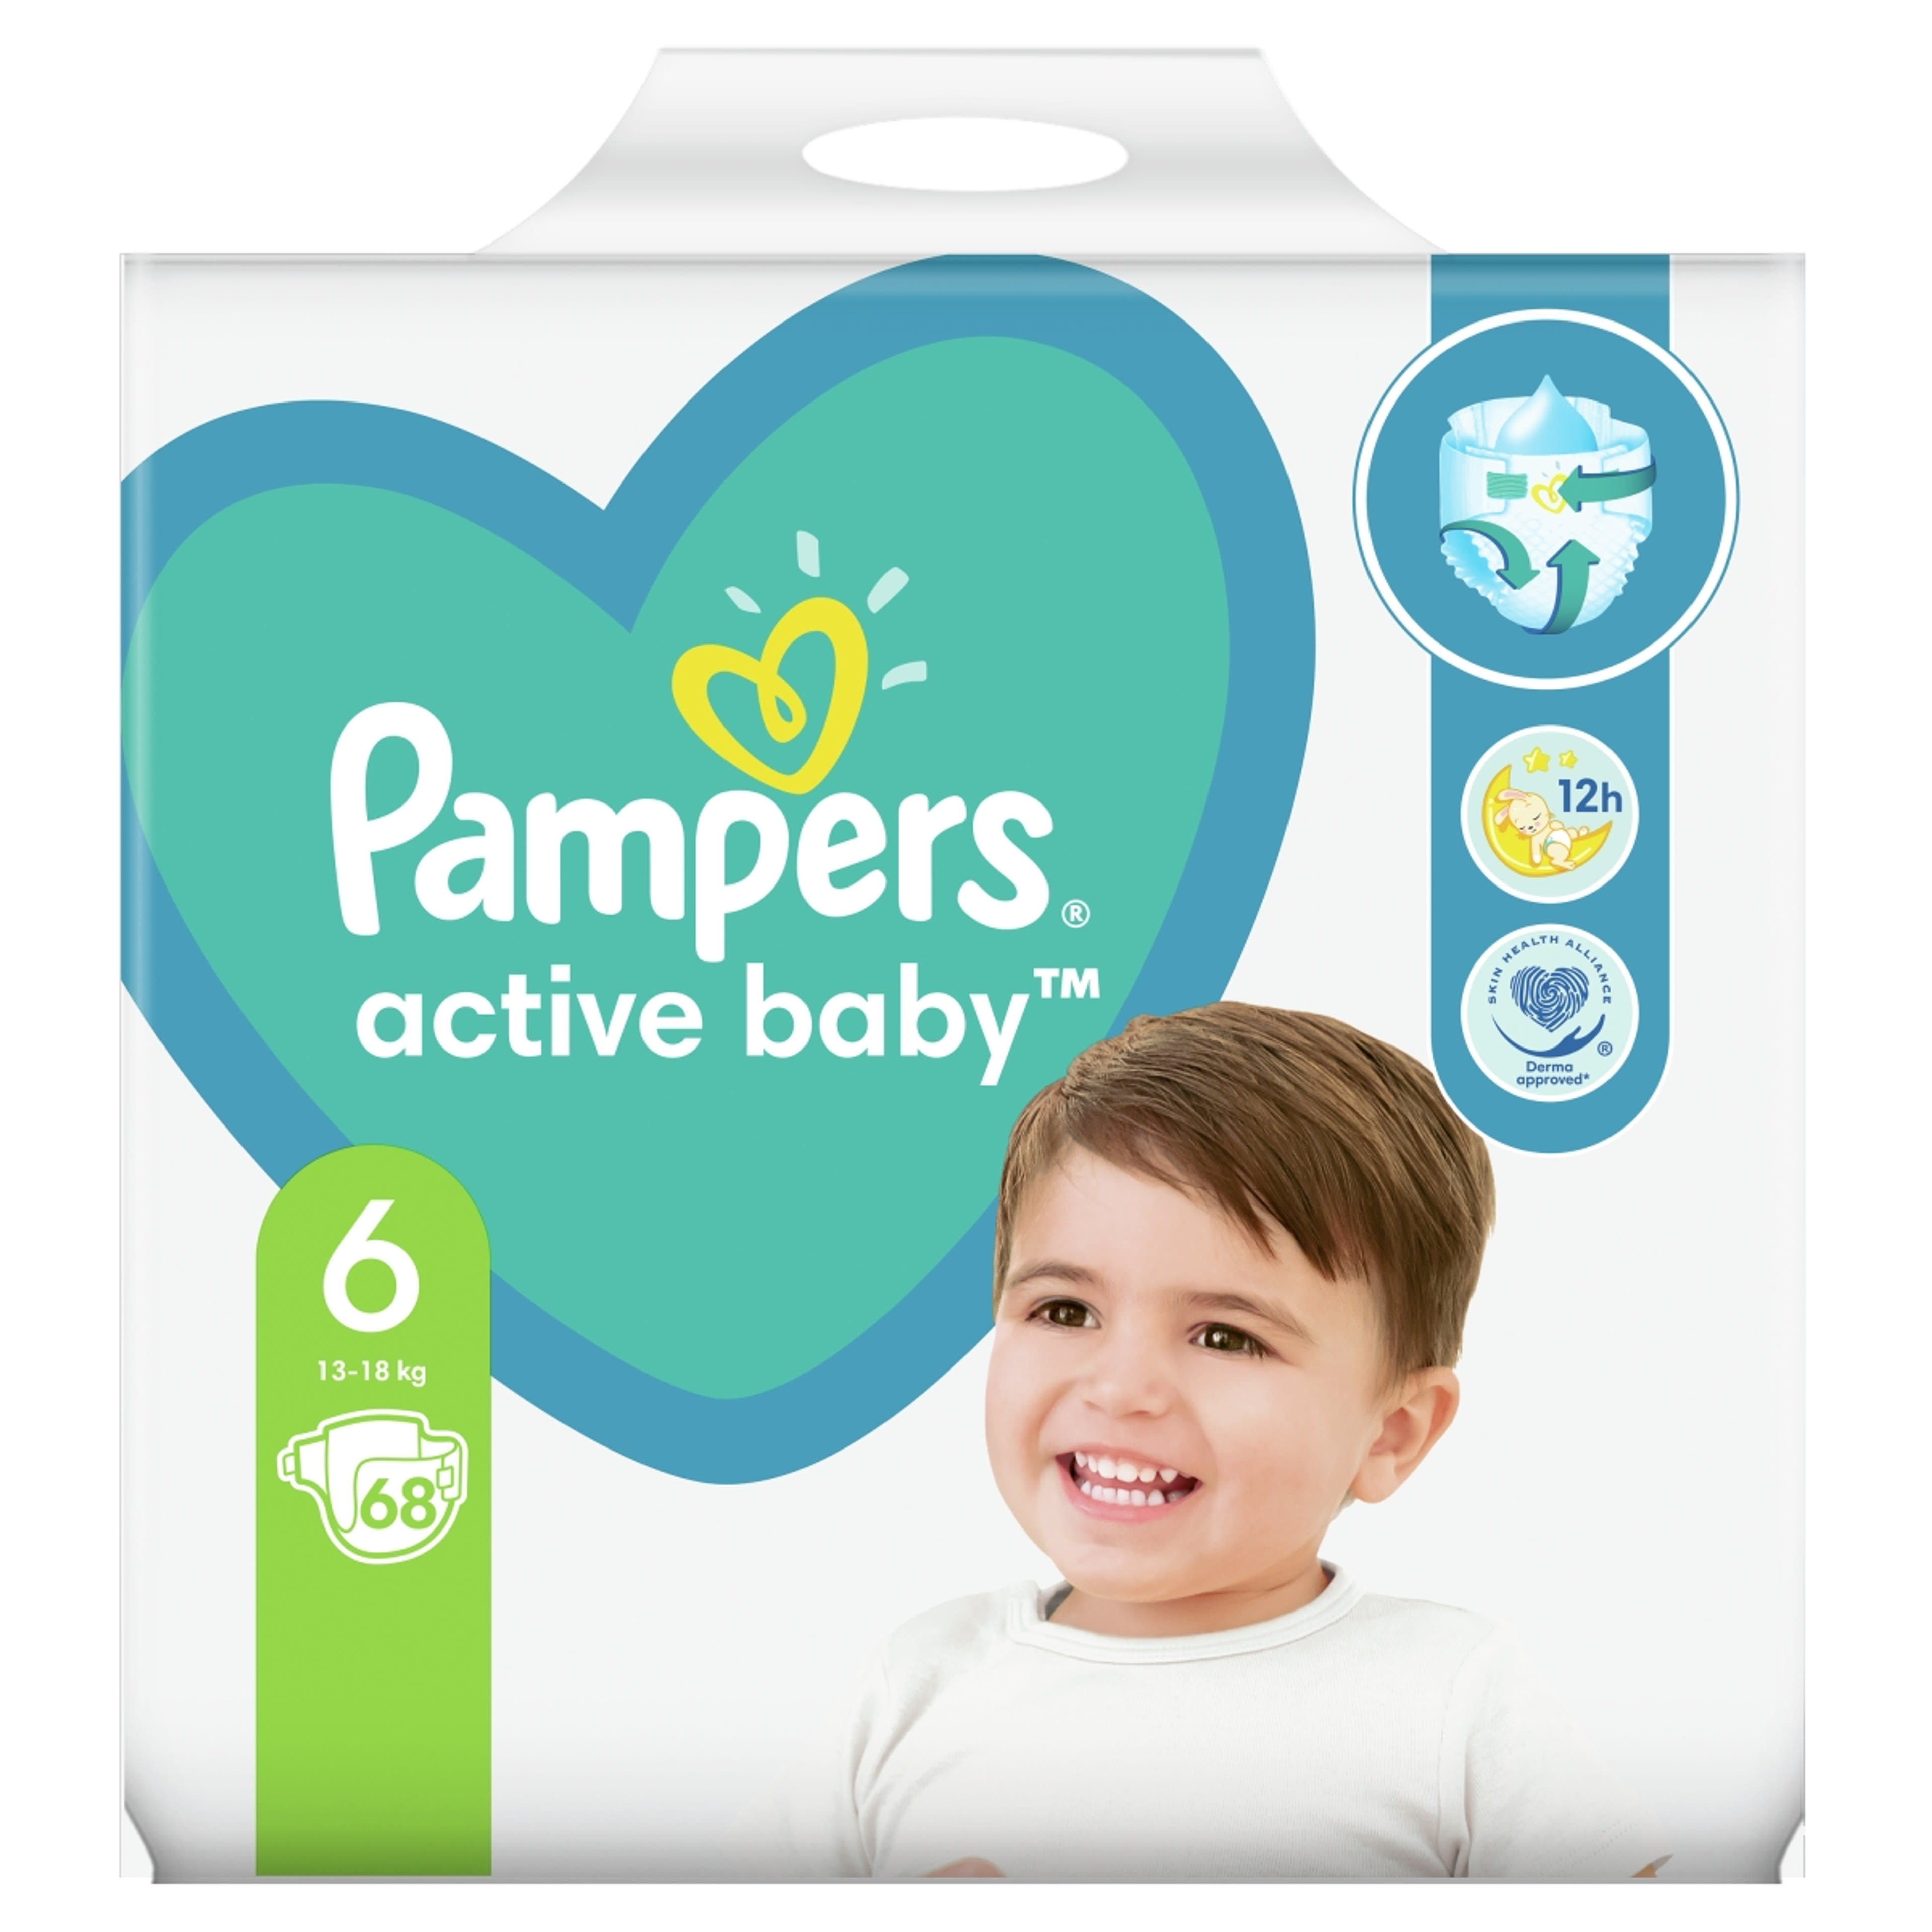 Pampers Giant Pack+ 6-os 13-18kg - 68 db-1